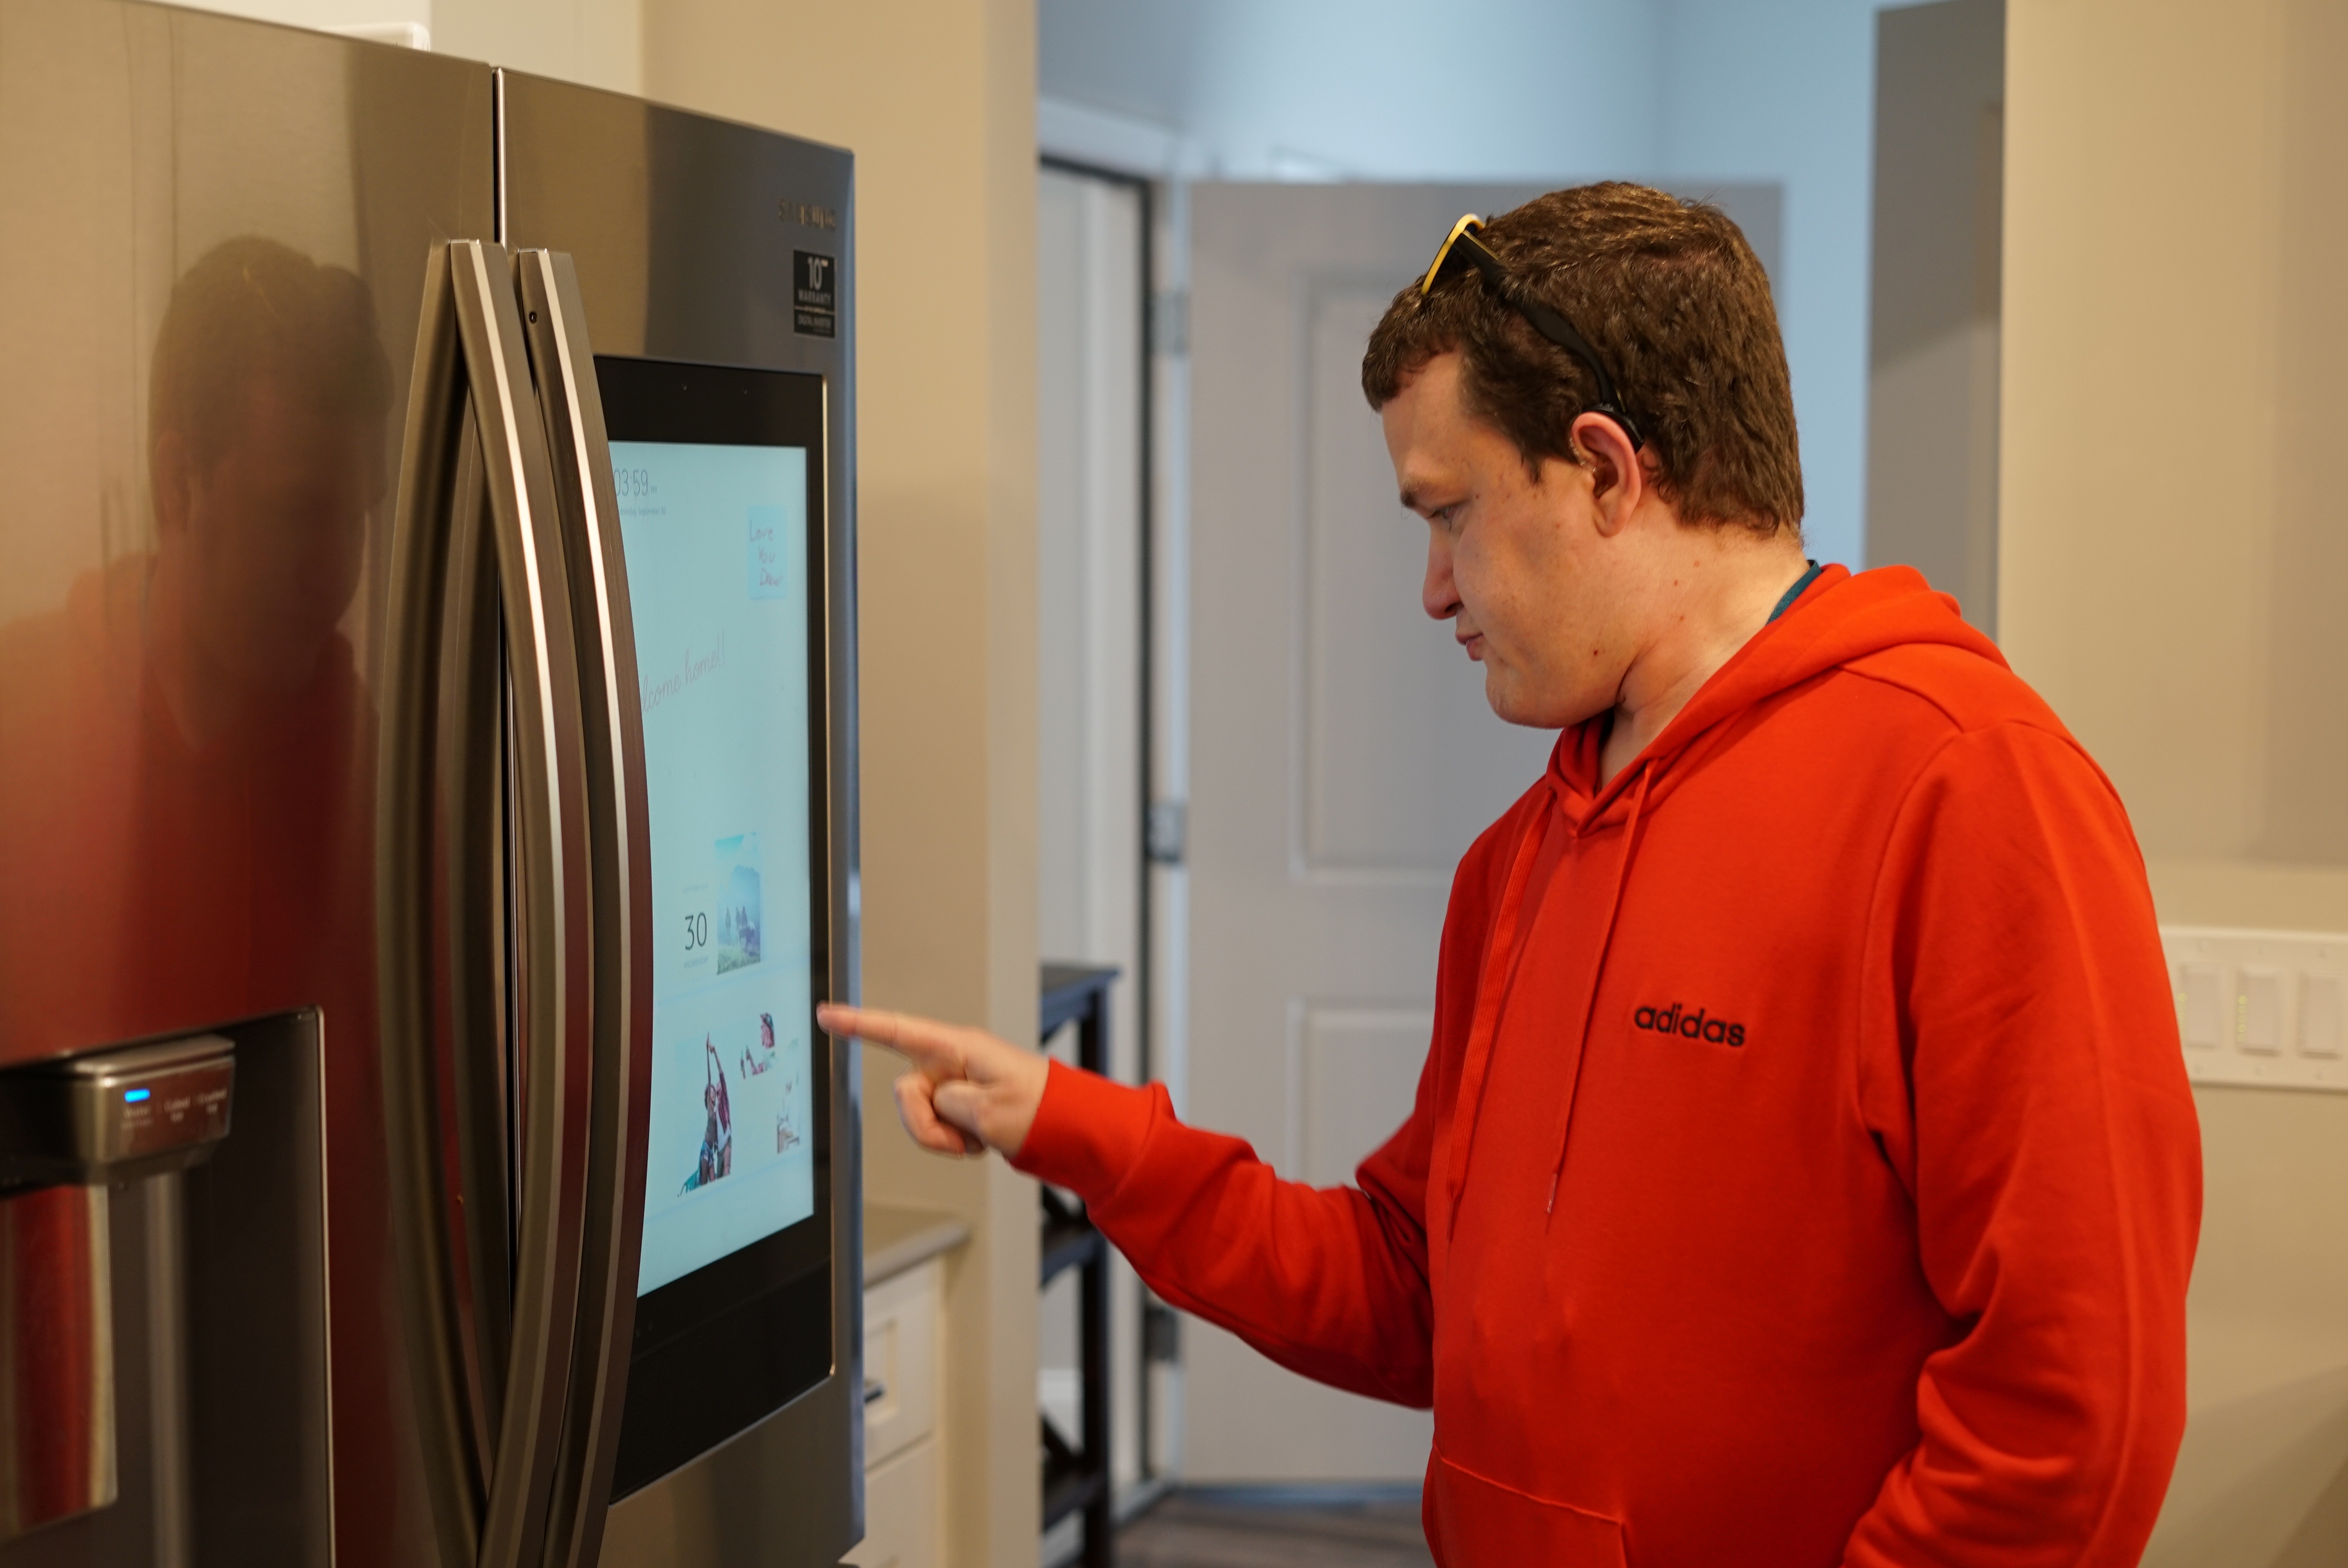 A man in a red hoodie touches a virtual screen on the smart refrigerator.